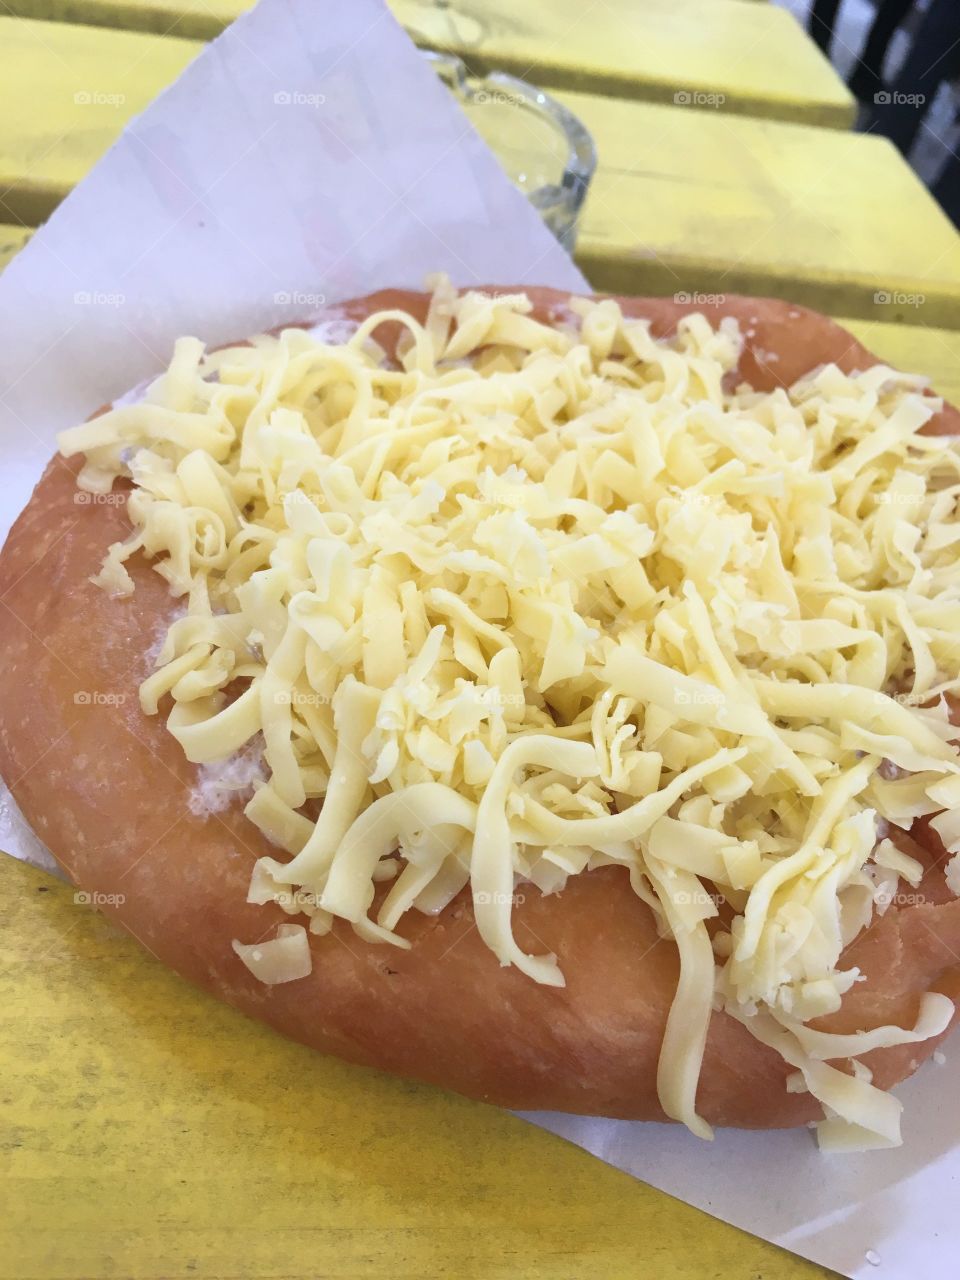 Lángos - a classic Hungarian street food (fried bread topped with sour cream and cheese)